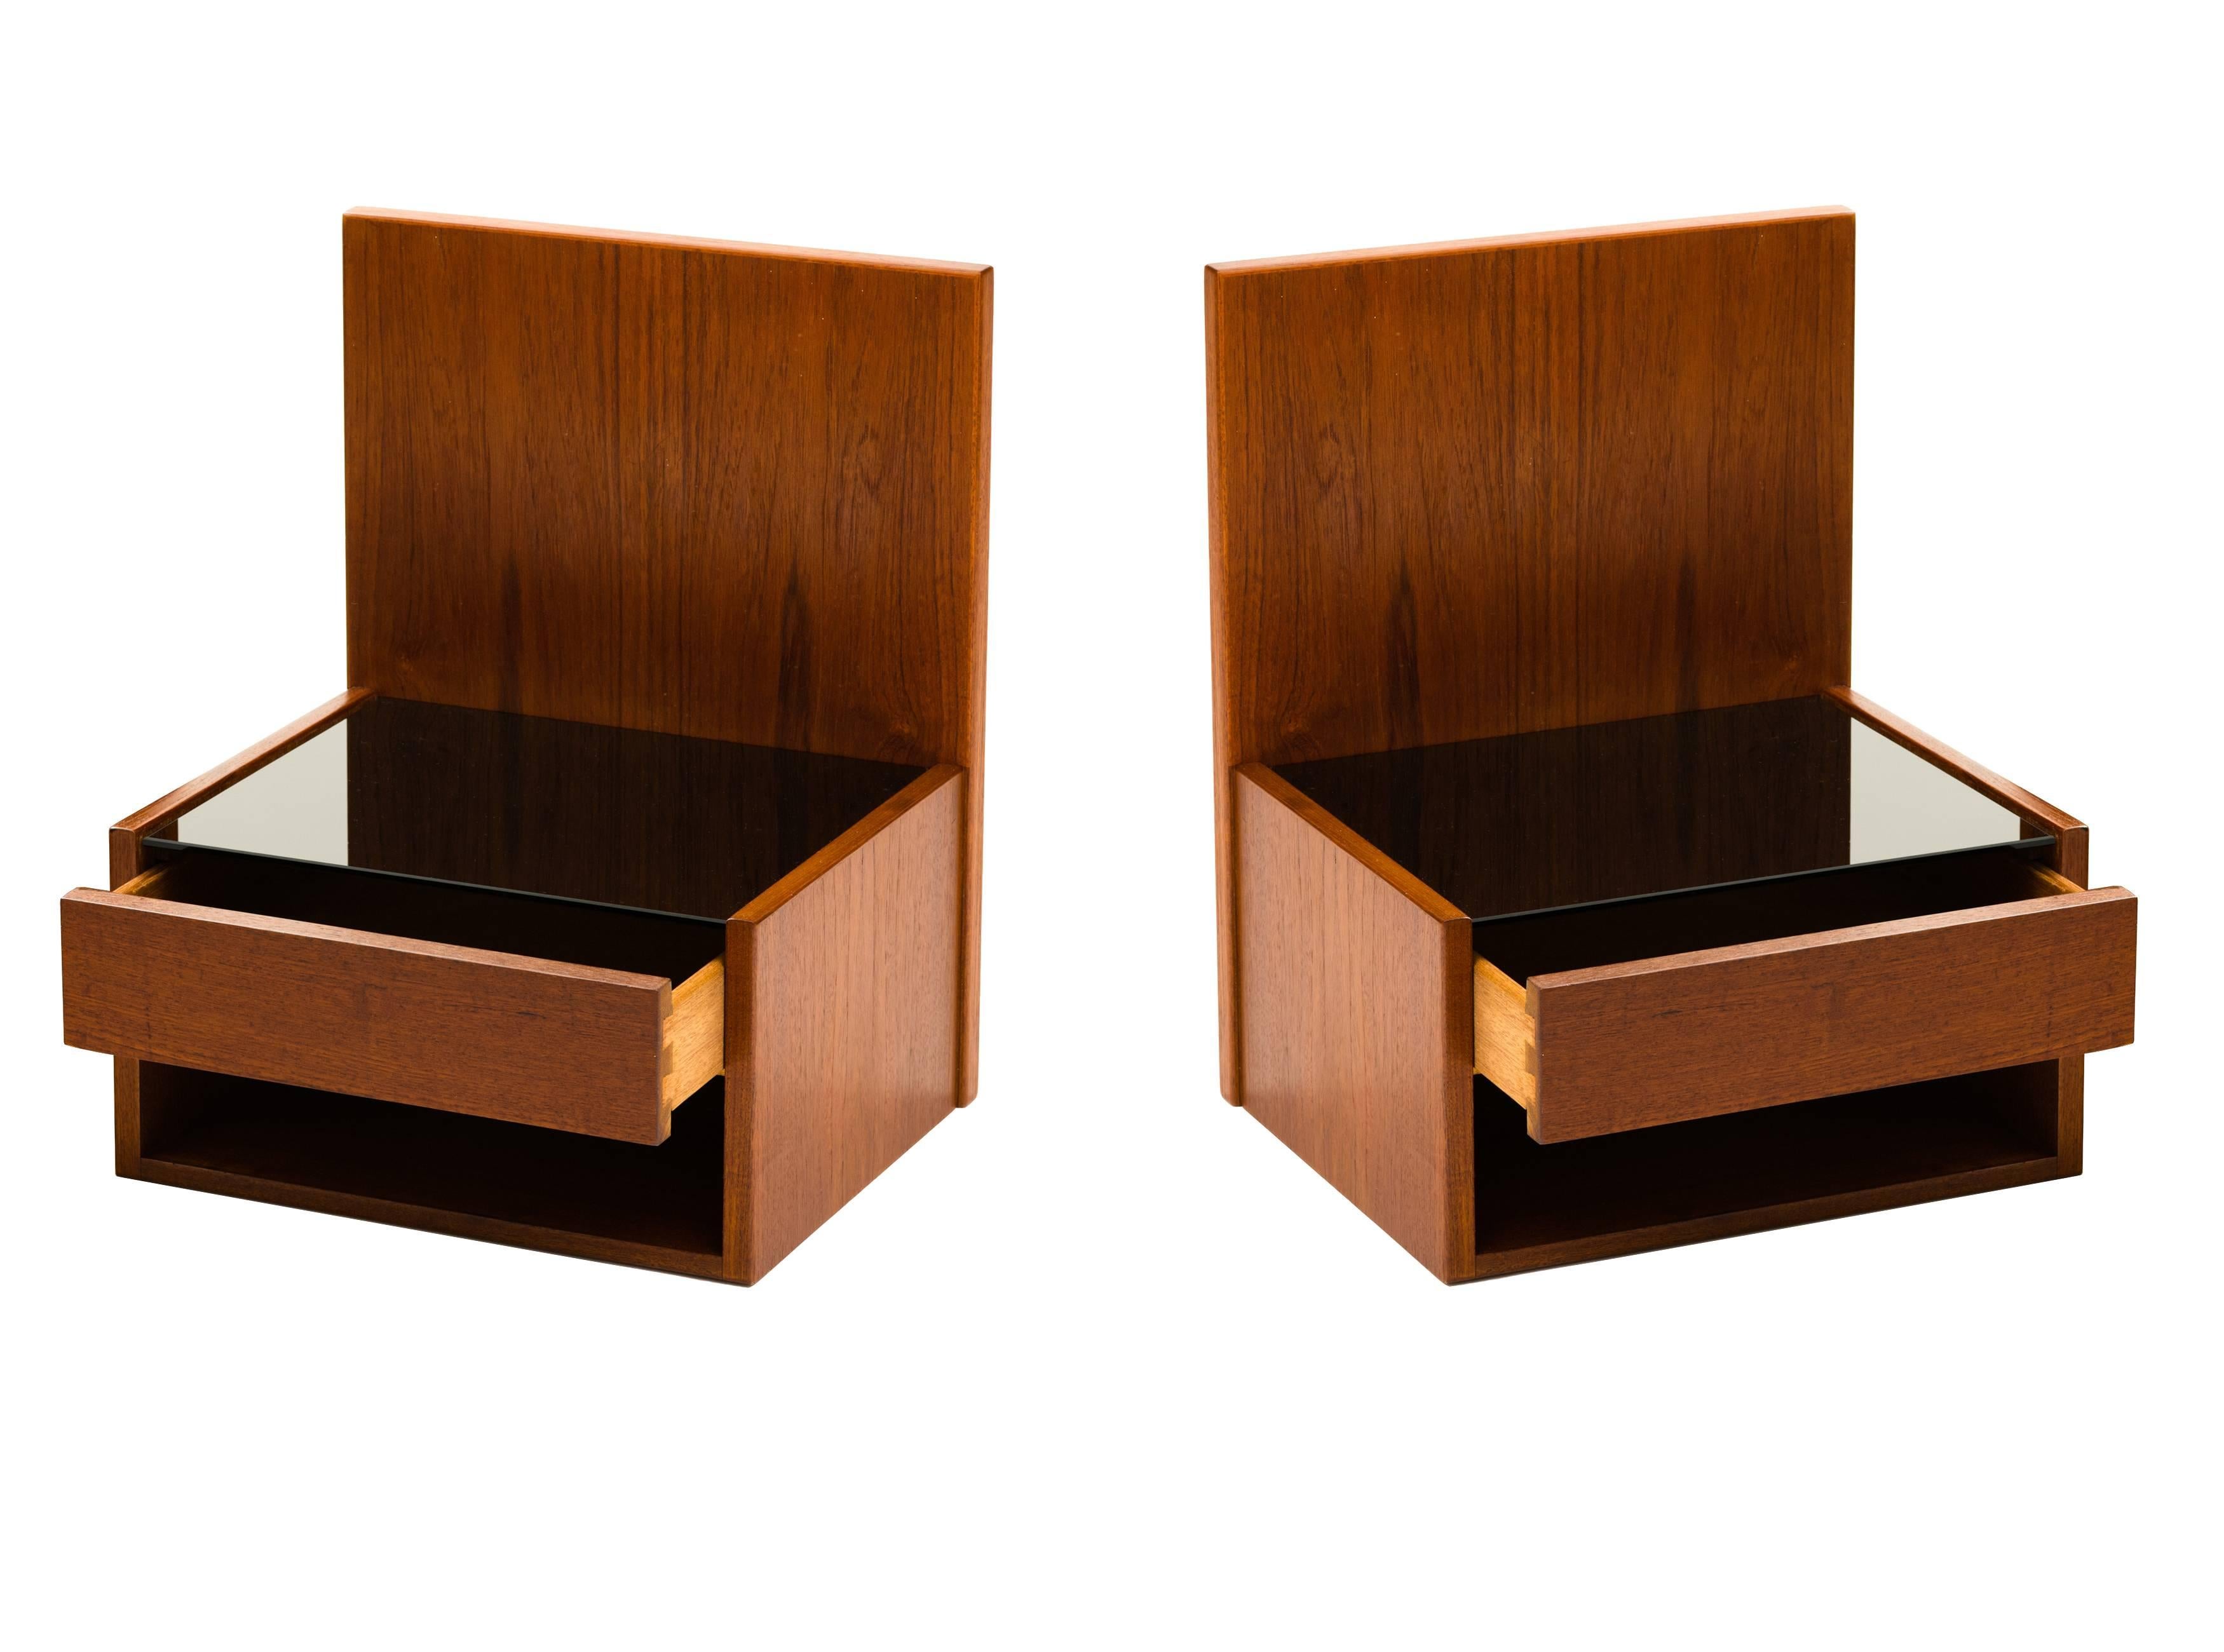 A pair of floating night stands or shelves in teak, each with a single drawer, open storage compartment beneath and a smoked glass top surface, designed by Hans Wegner for Getama. These may be mounted either to the wall or to the sides of your